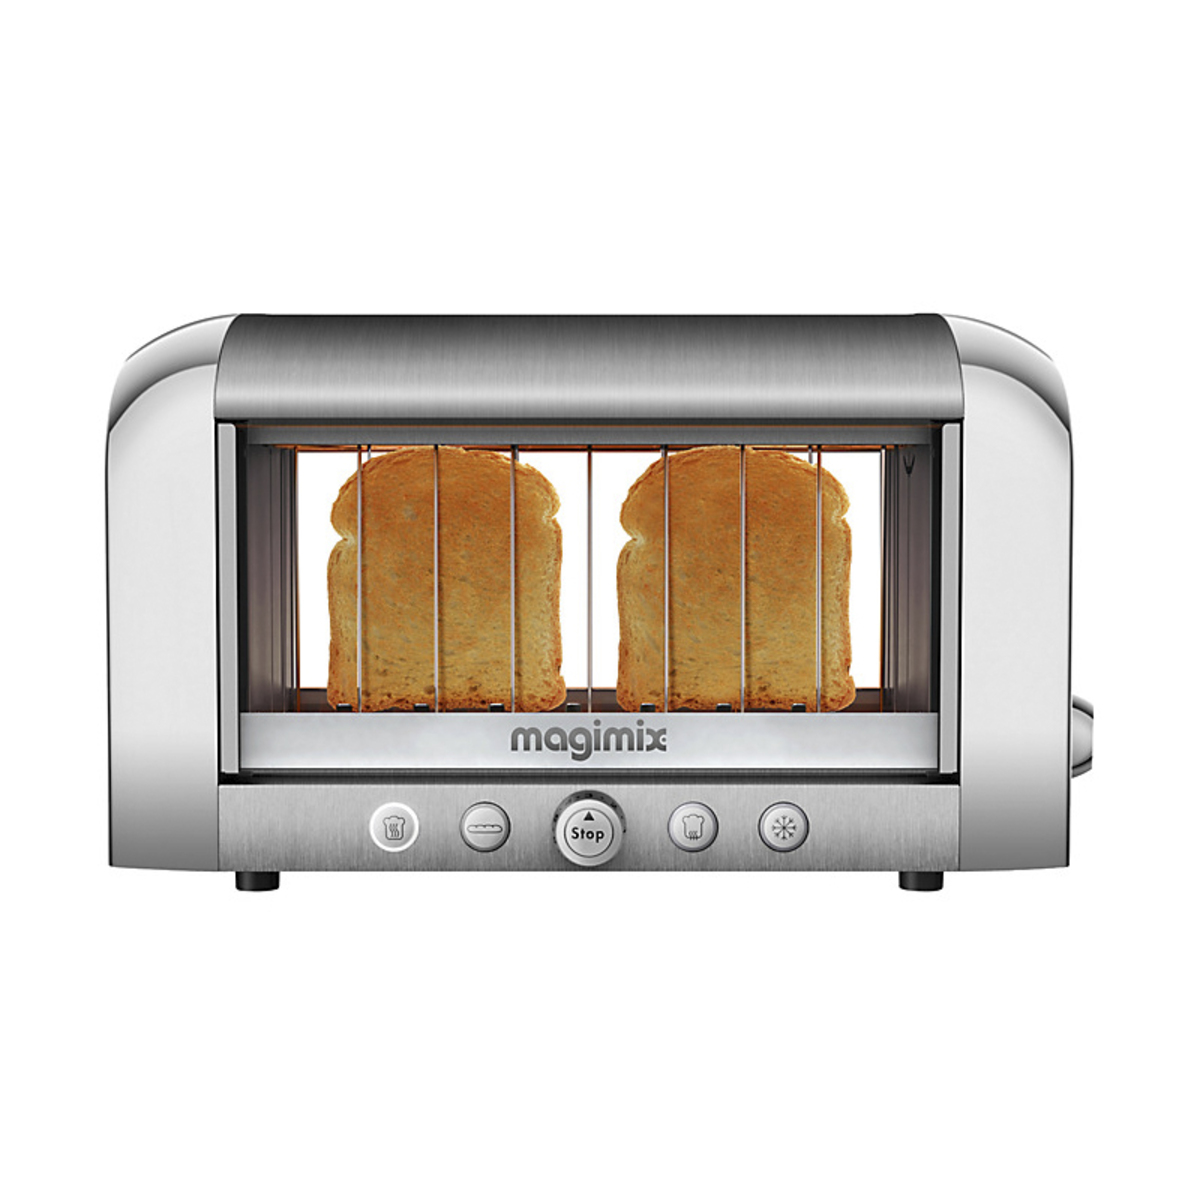 Magimix 11526 TOASTER 2-Slice Vision Toaster with Glass Window, Stainless S